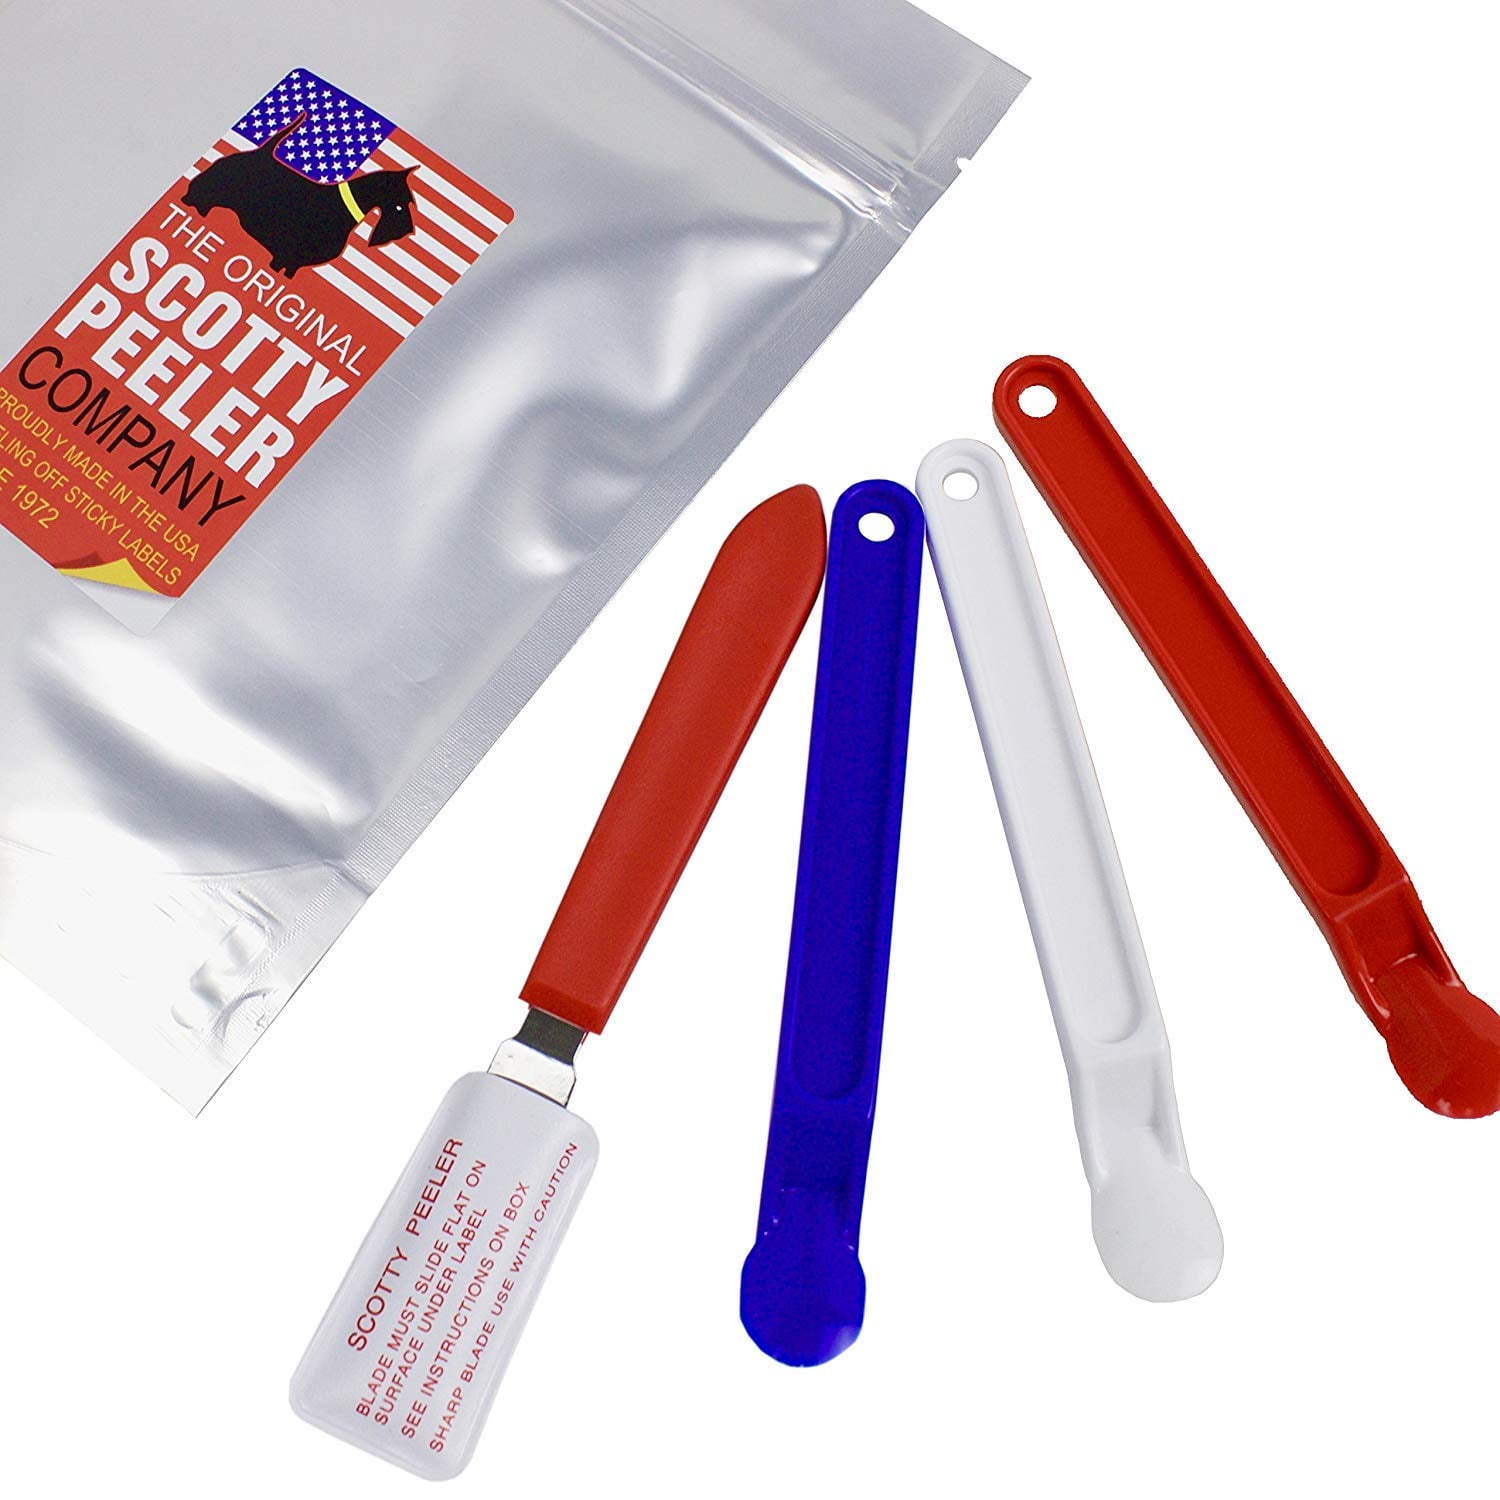 Scotty Peeler Label & Sticker Remover - Set of 4: Red, White, Blue, or Metal